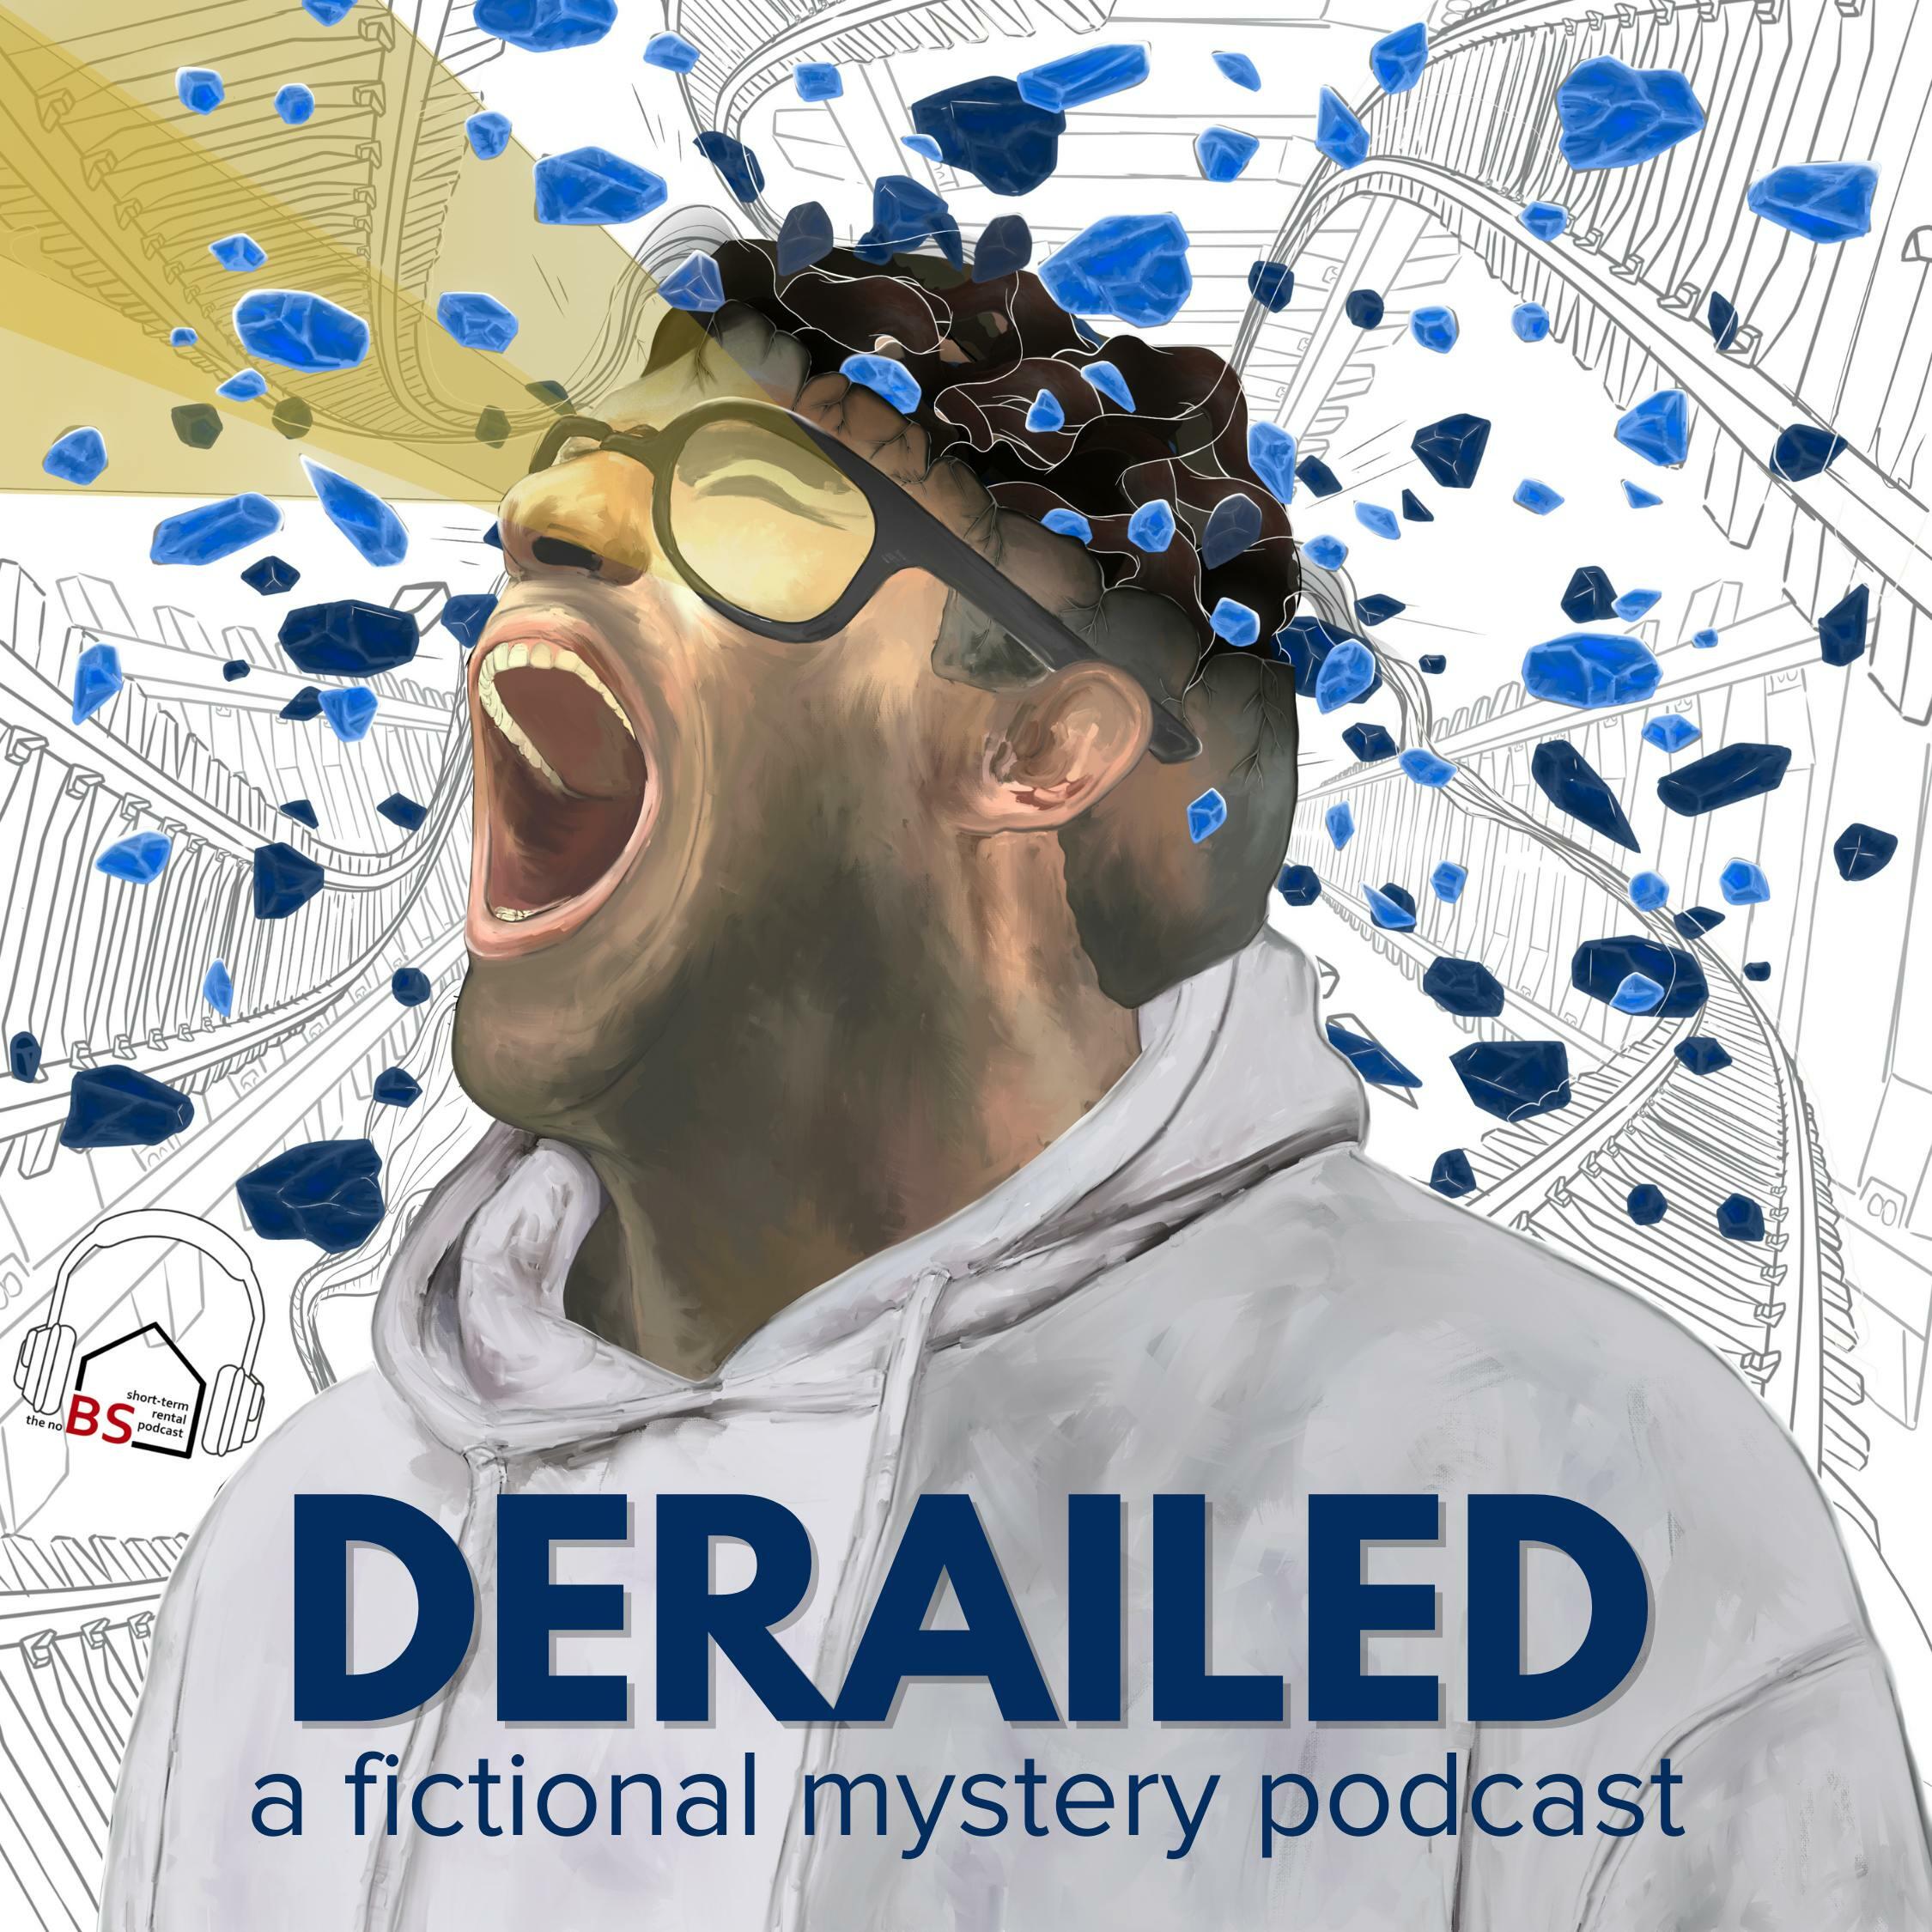 DERAILED a fictional mystery podcast iHeart